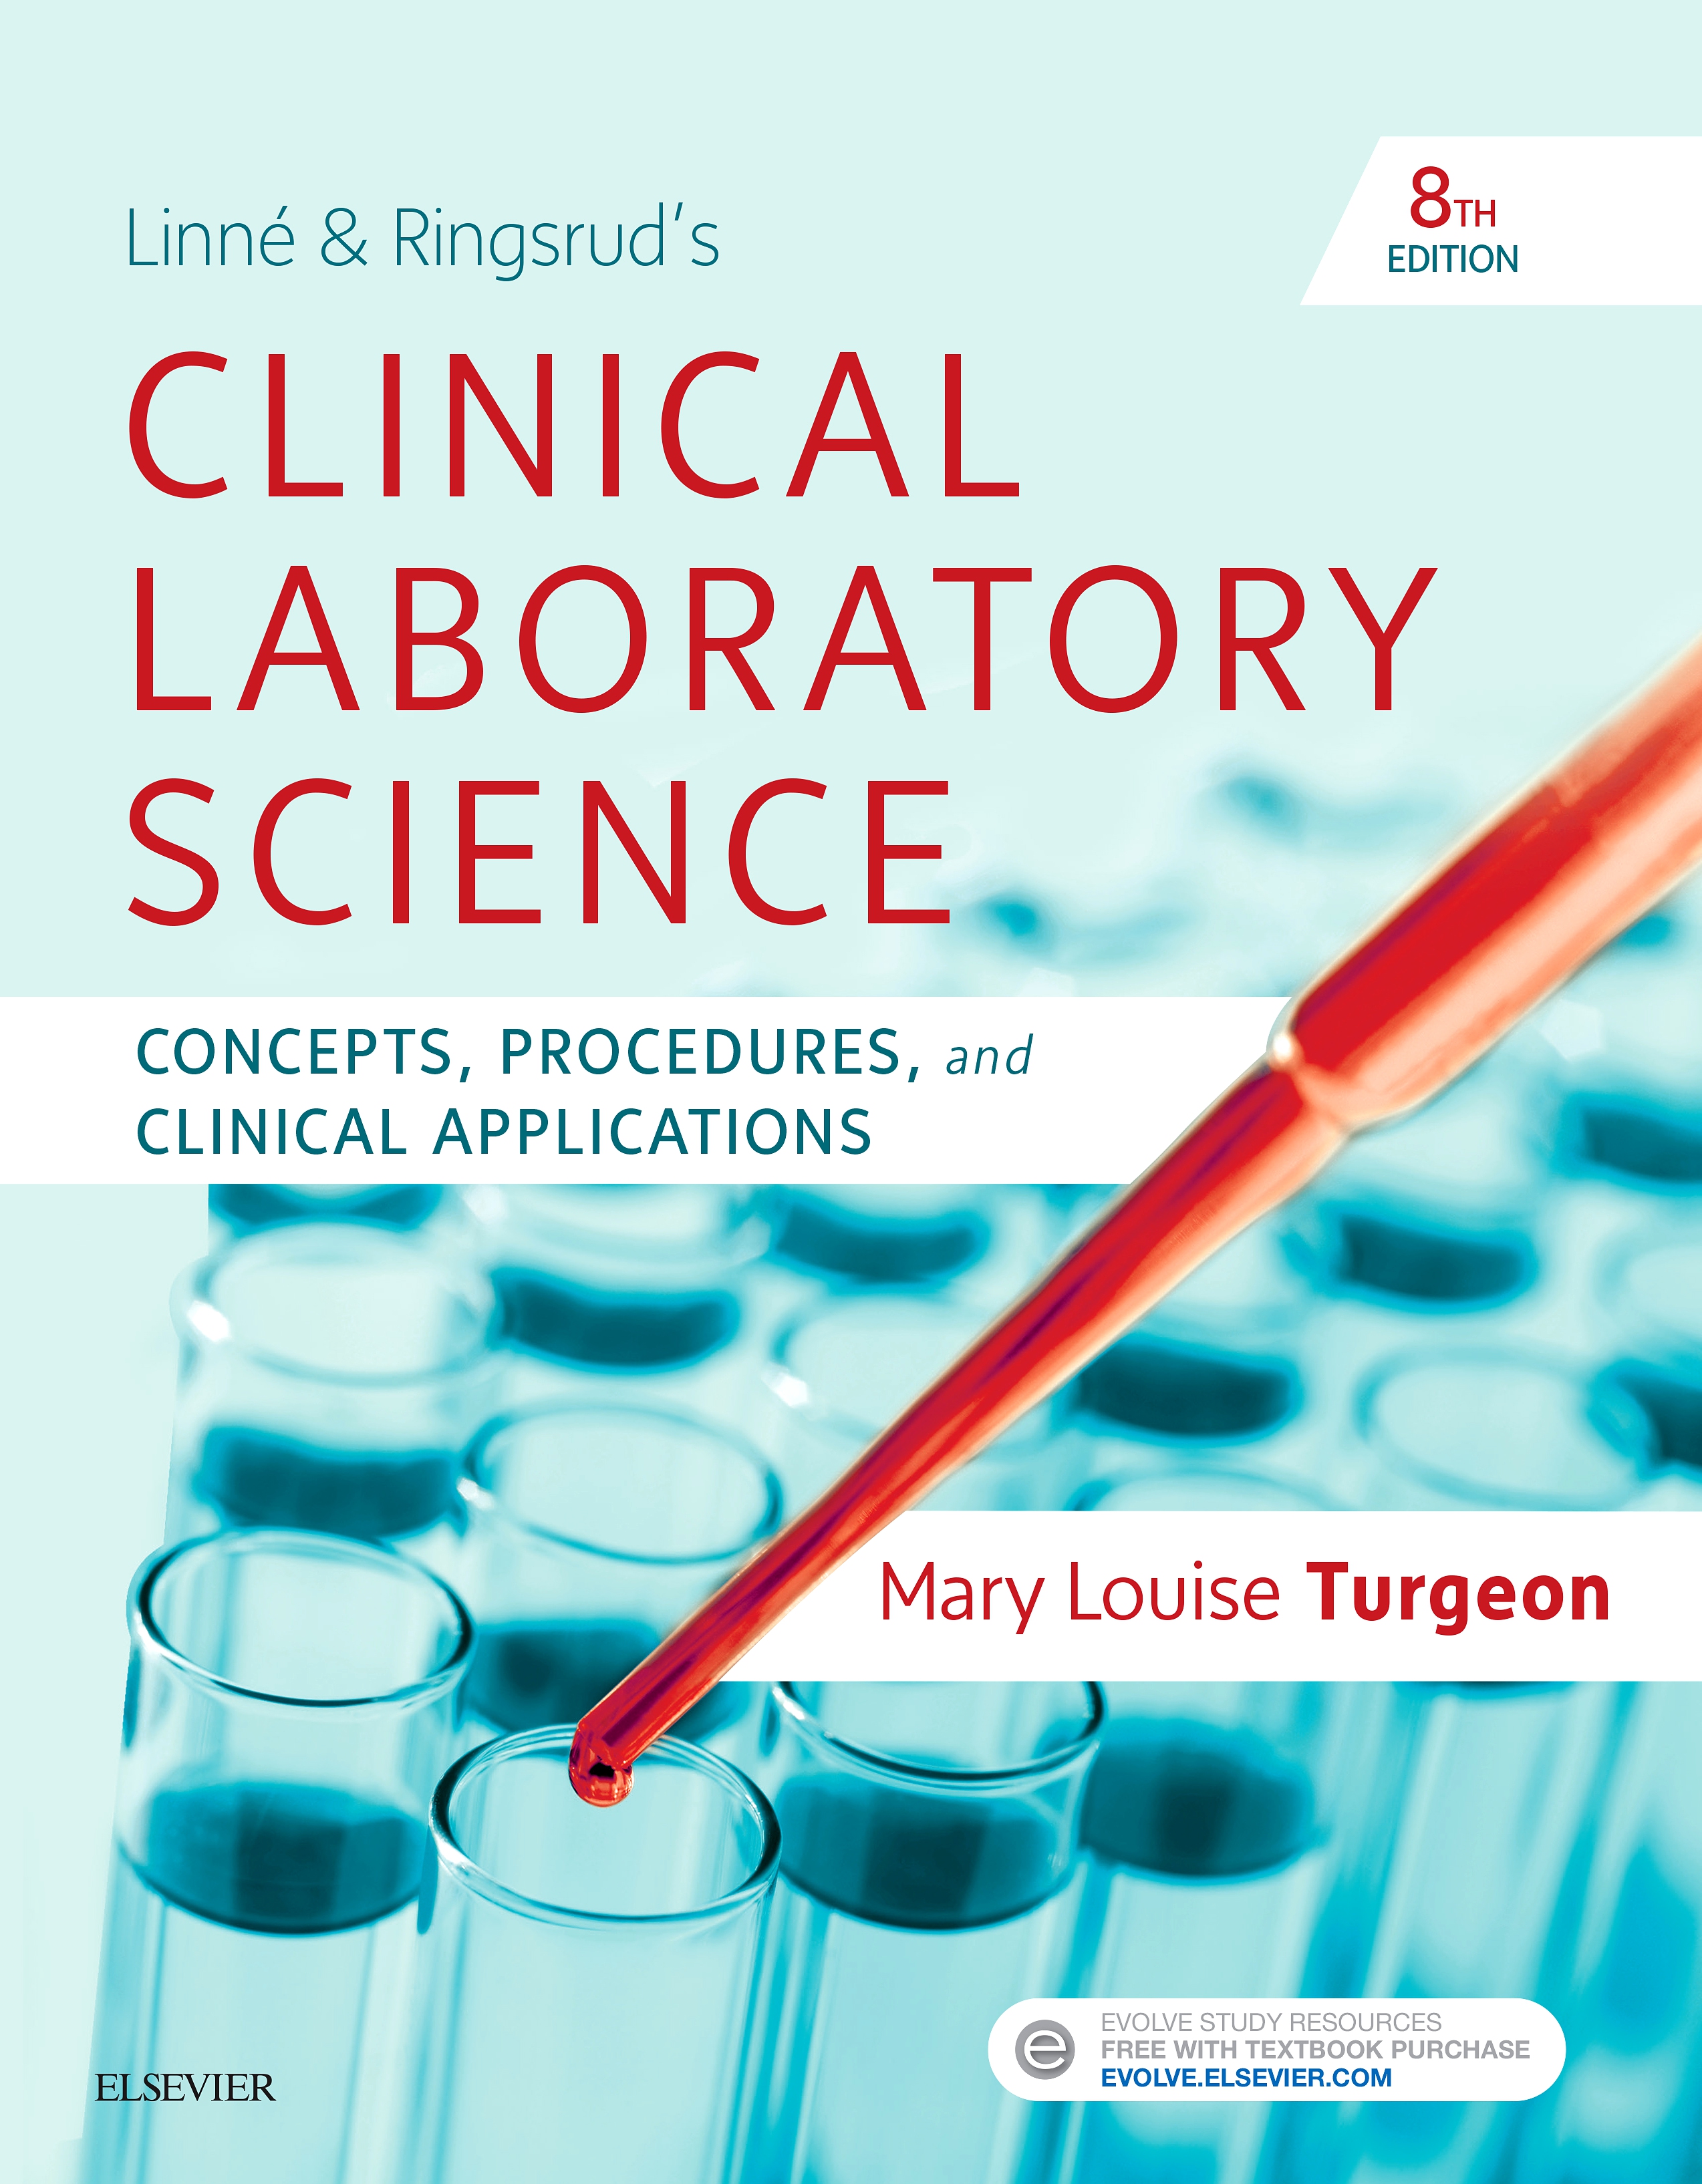 Evolve Resources for Linne & Ringsrud's Clinical Laboratory Science, 8th Edition